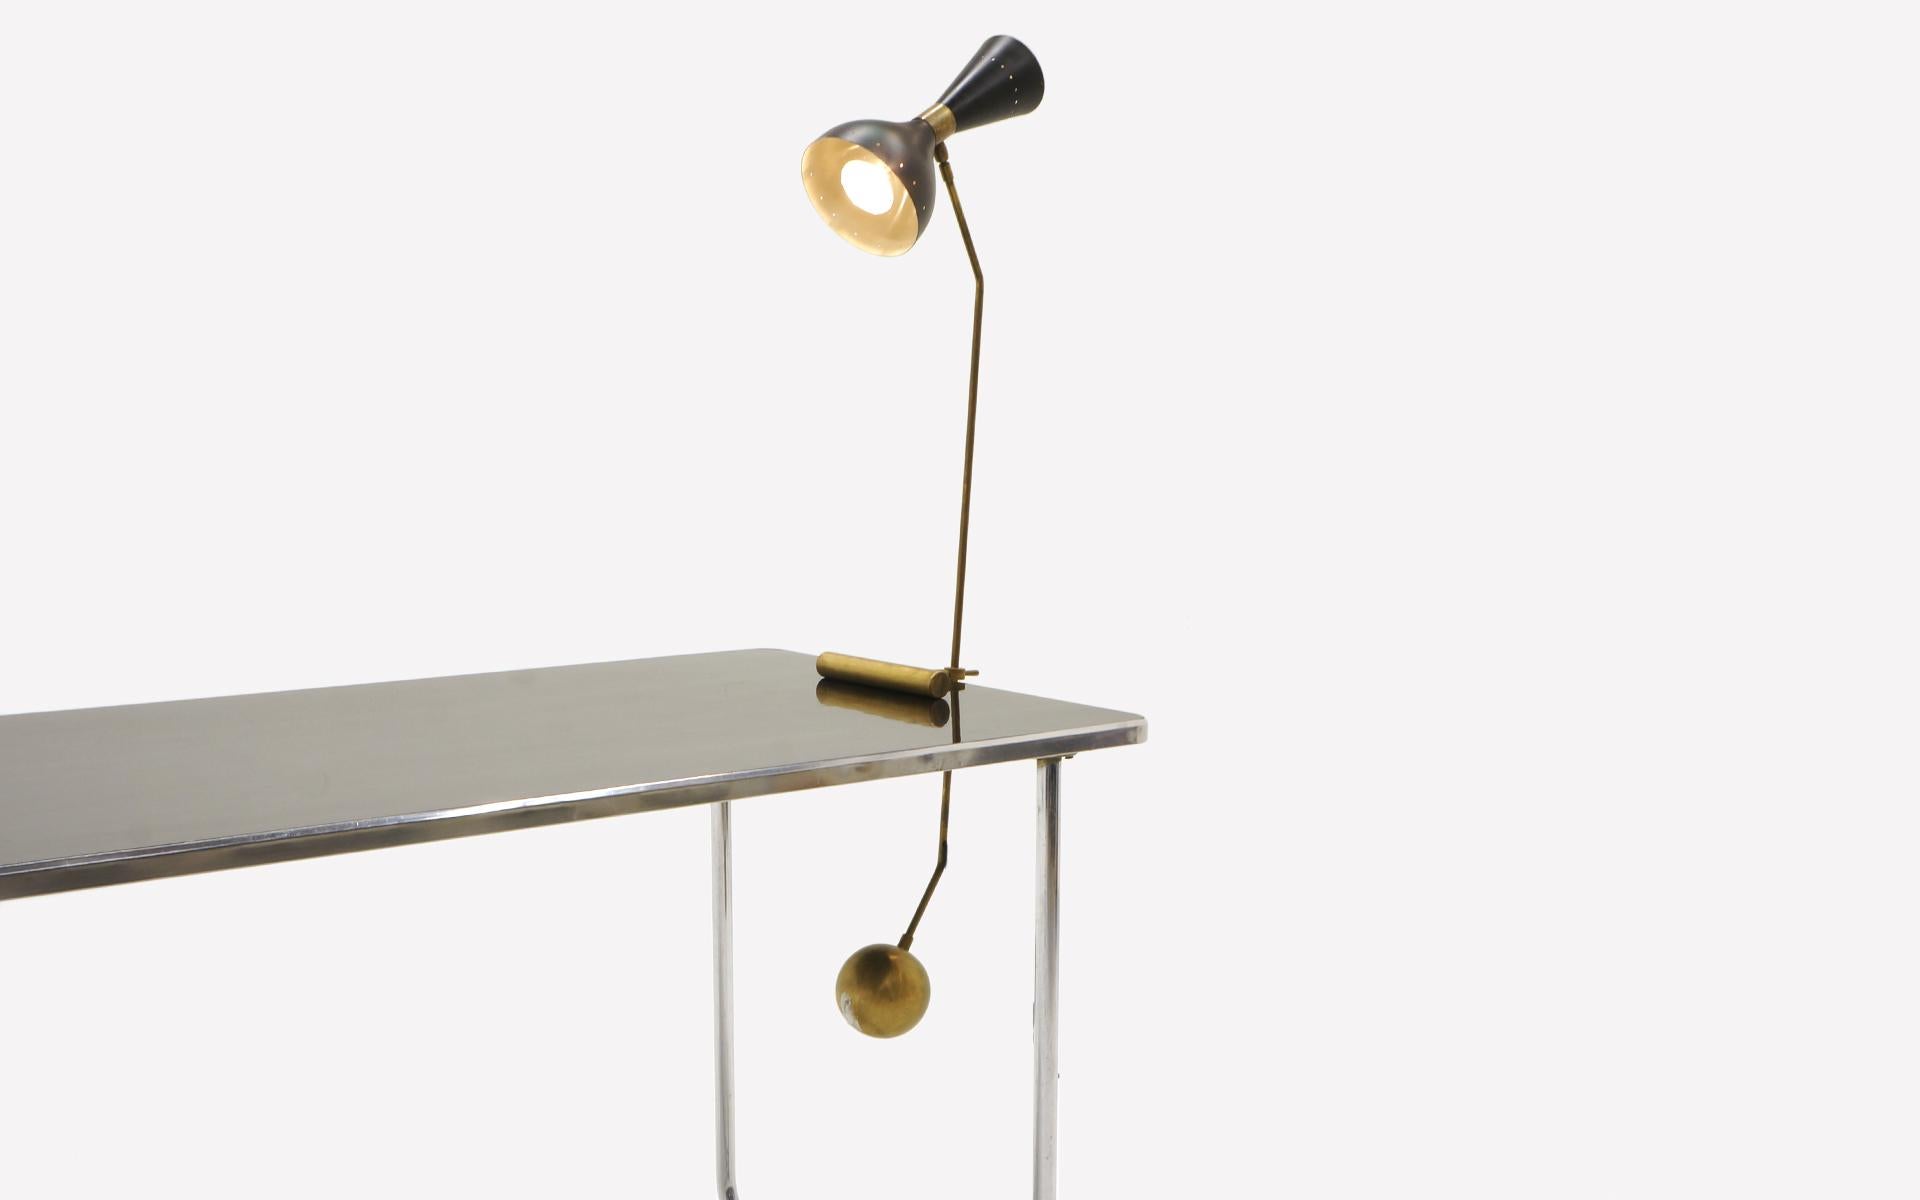 Large Italian counter-balance table or desk lamp by Stilnova. The height is adjustable as is the lamp fixture moves 360 degrees to direct light. Nice patina. Wired for US and ready to use.